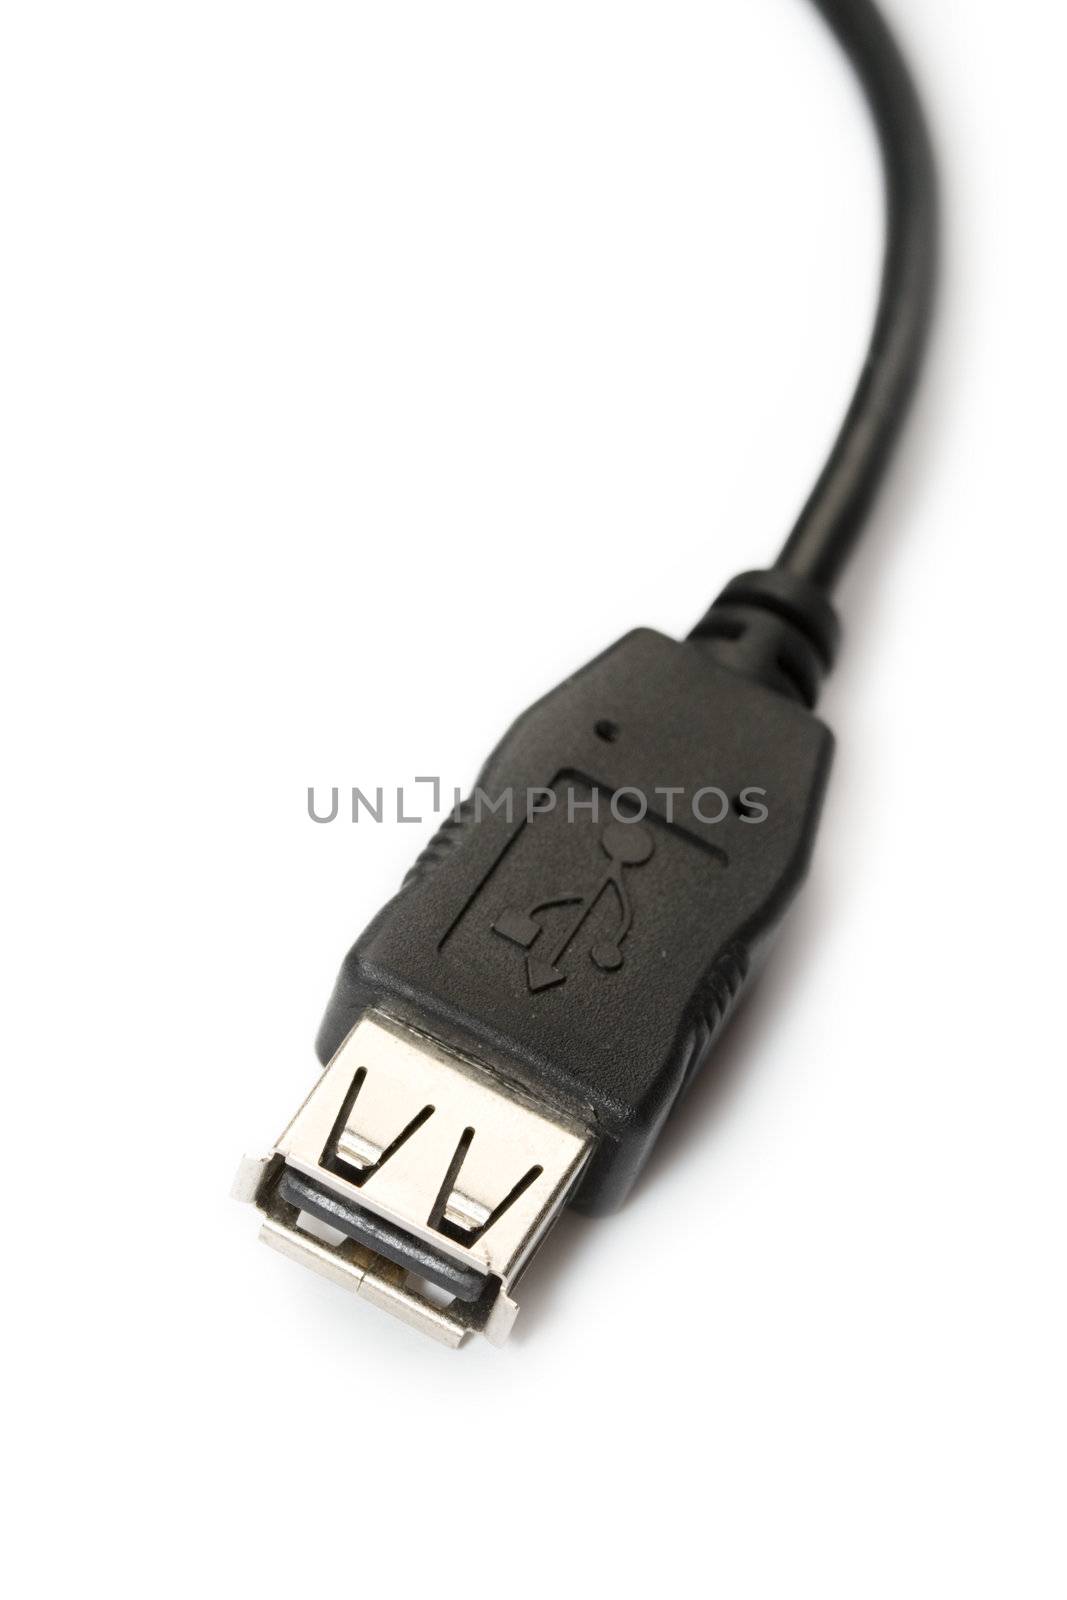 Usb-cable isolated on the white background by Garsya